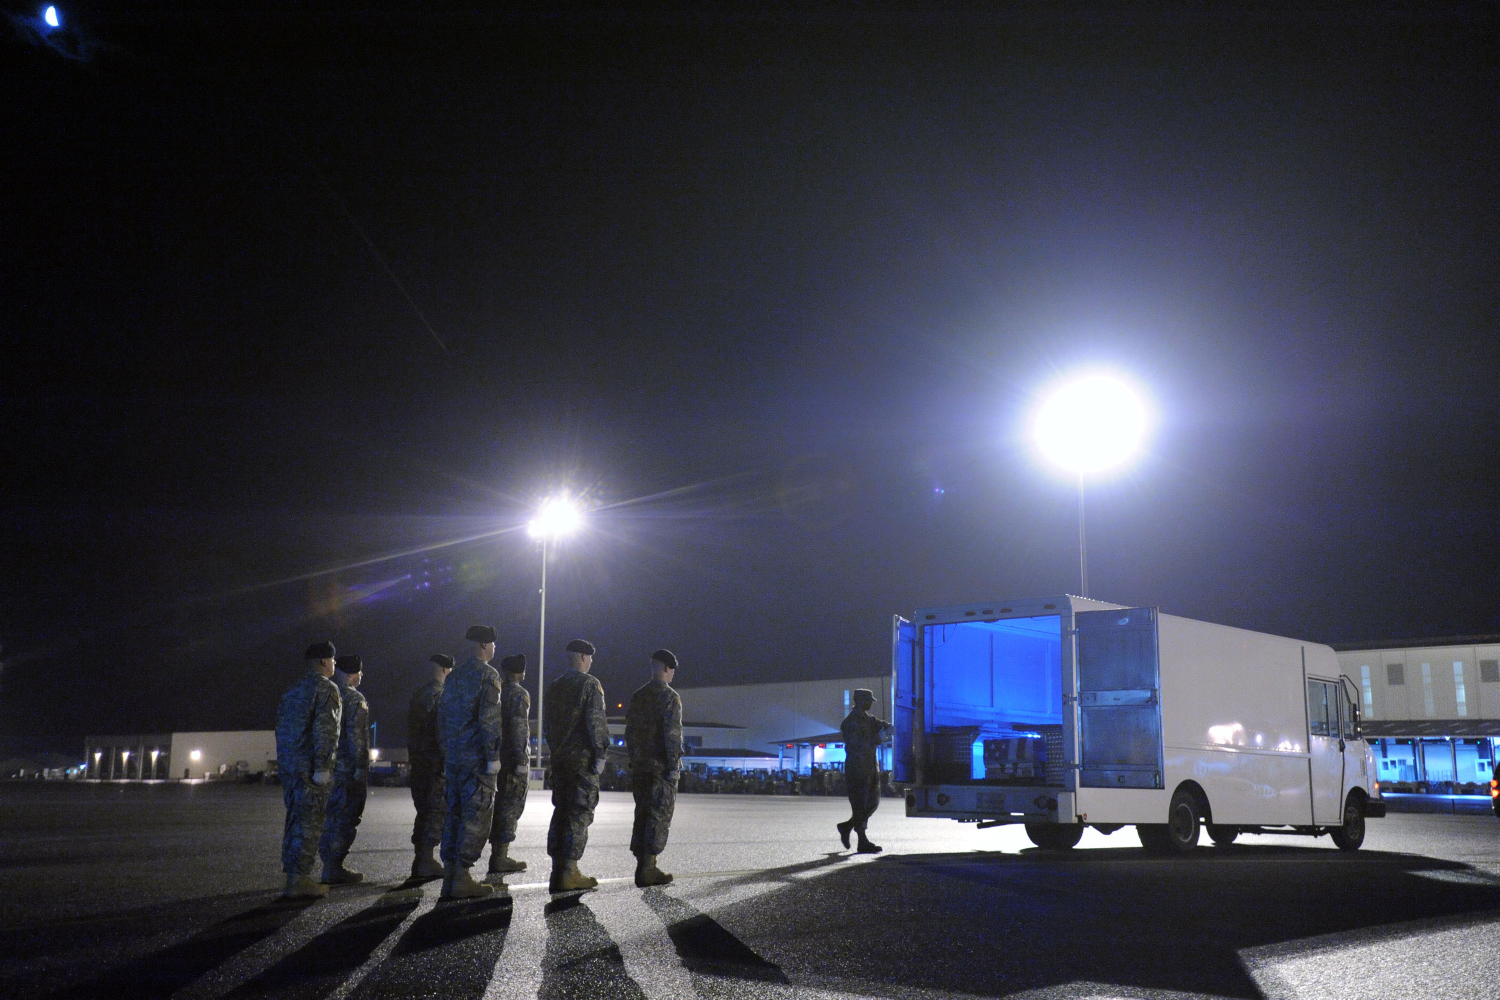 Senior Airman Kevin Gilliam, center, closes a transfer vehicle with transfer cases containing the remains of 1st Lt. Omar J. Vasquez and Pfc. Antonio G. Stiggins at Dover Air Force Base, Del., April 25, 2011.